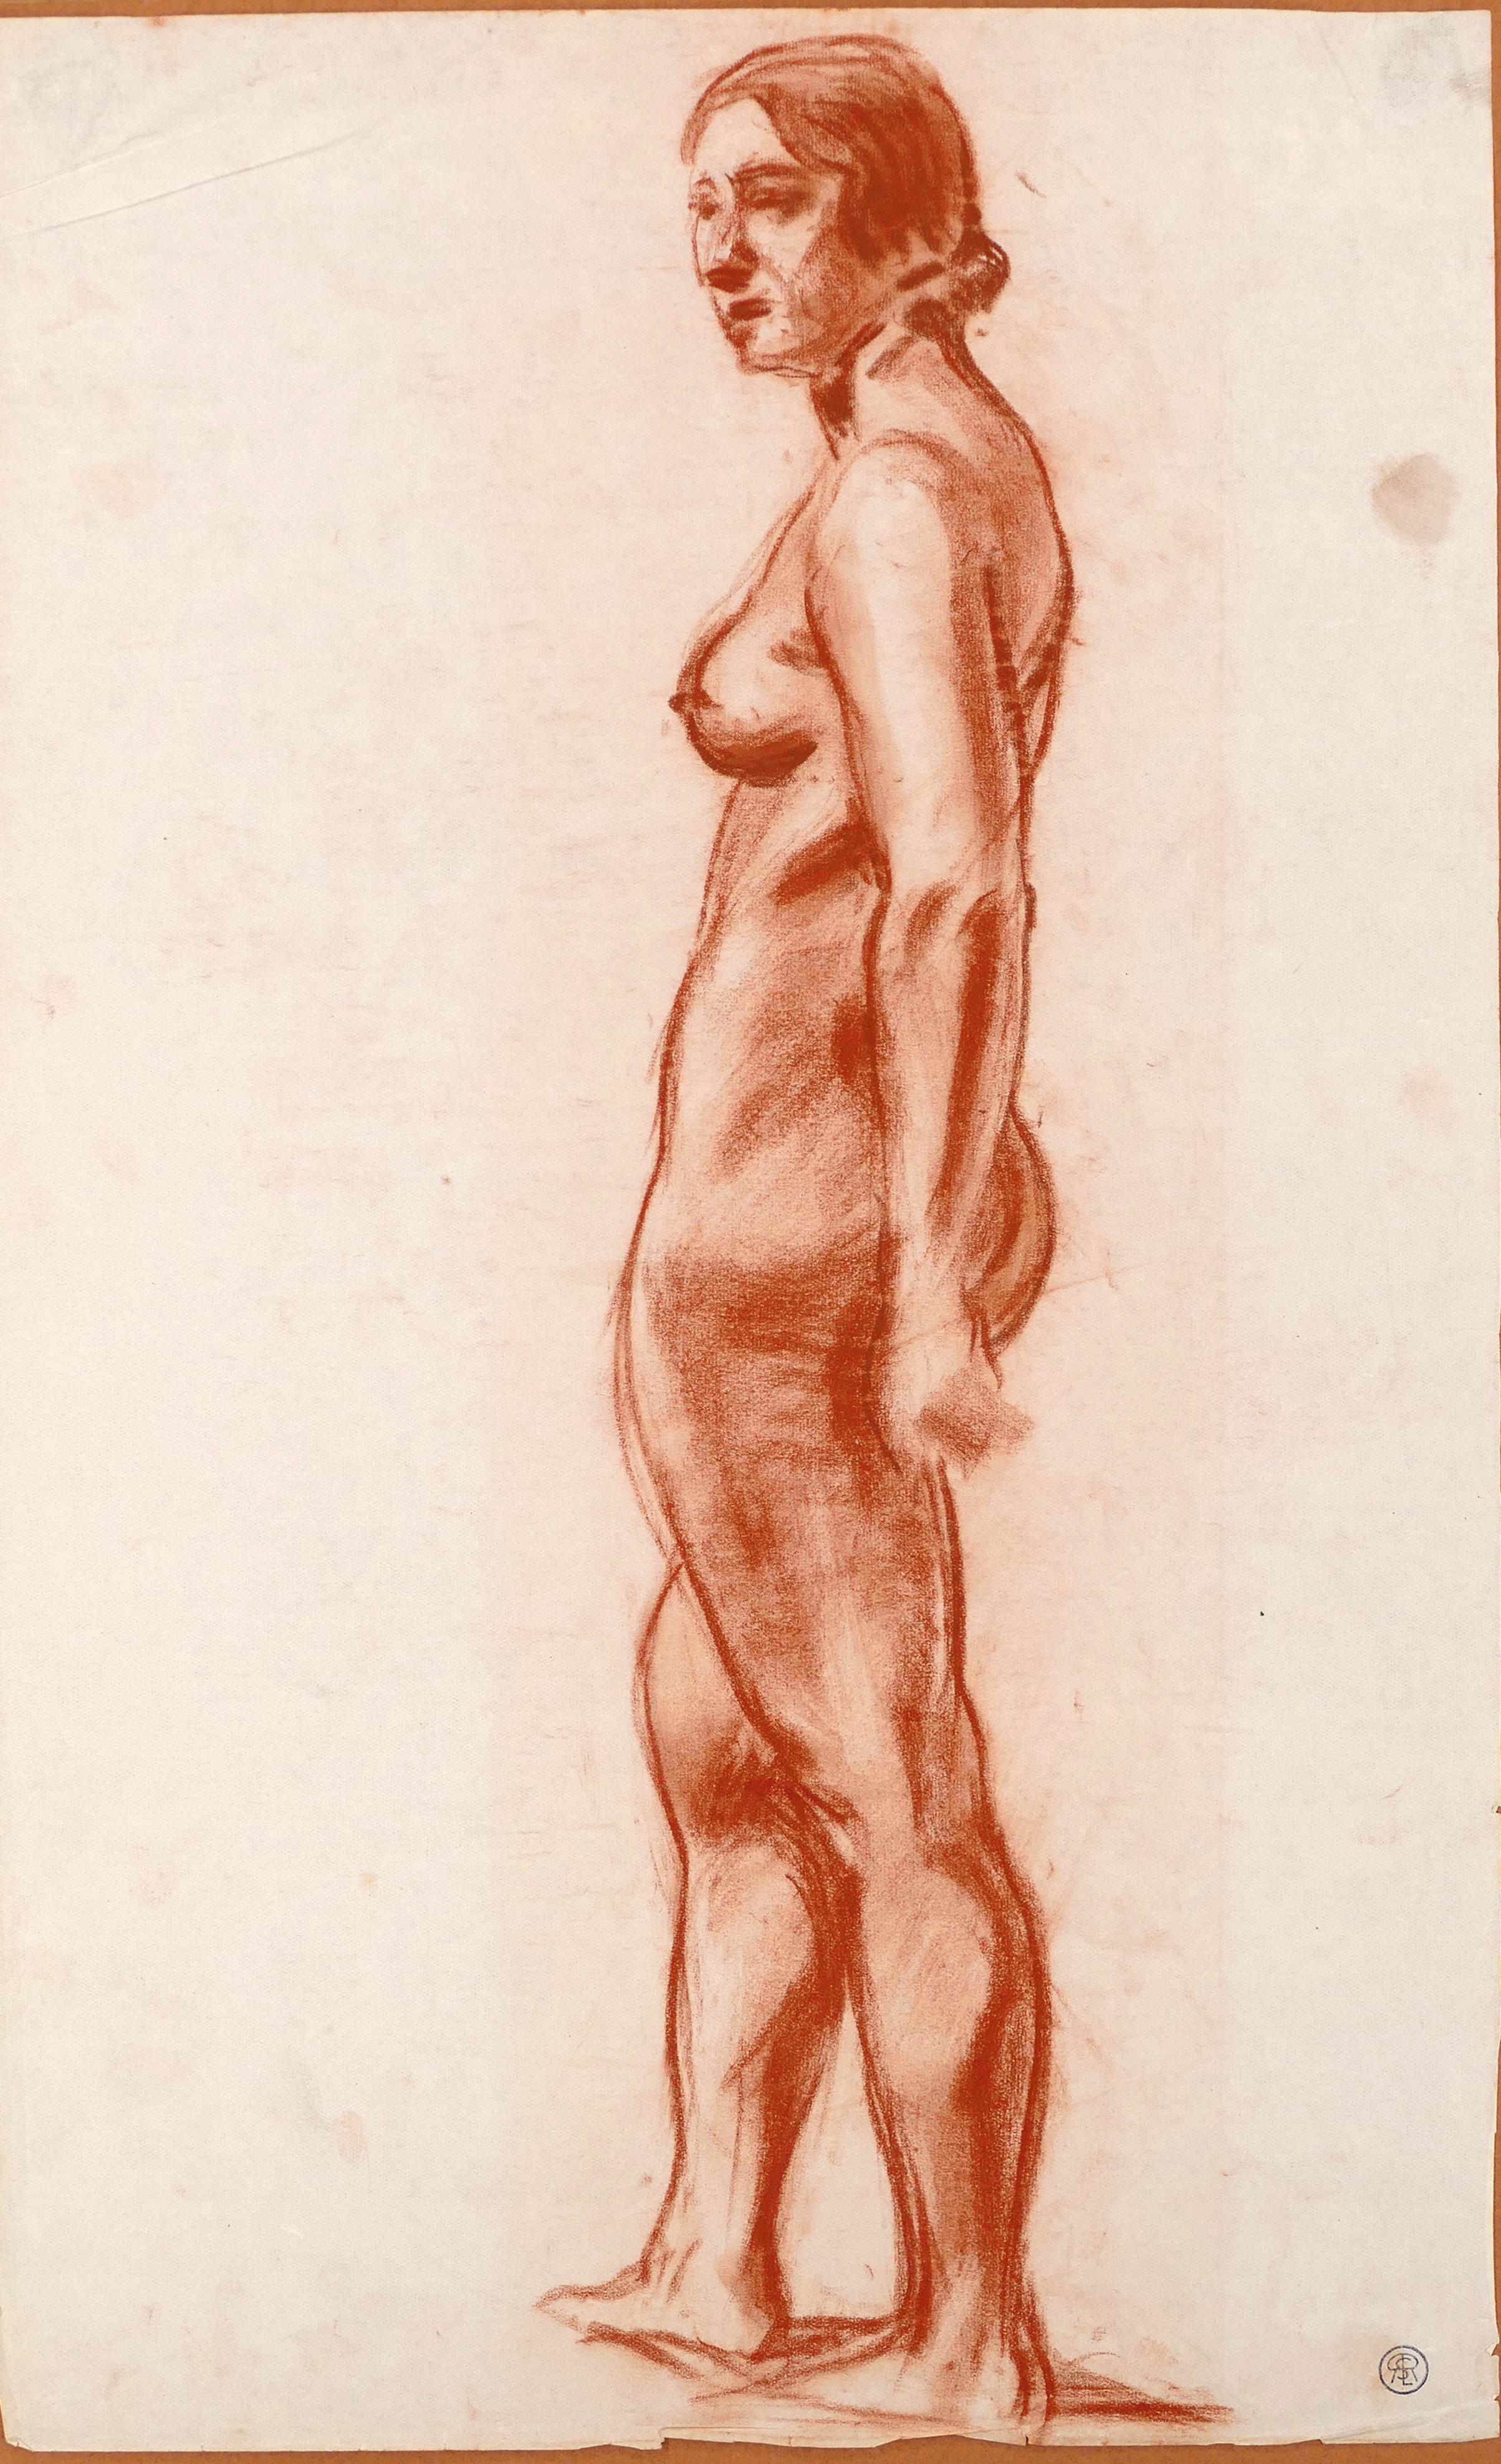 Standing Female Nude - Charcoal Drawing by M. Roche - Early 1900 - Art by Marcel Roche